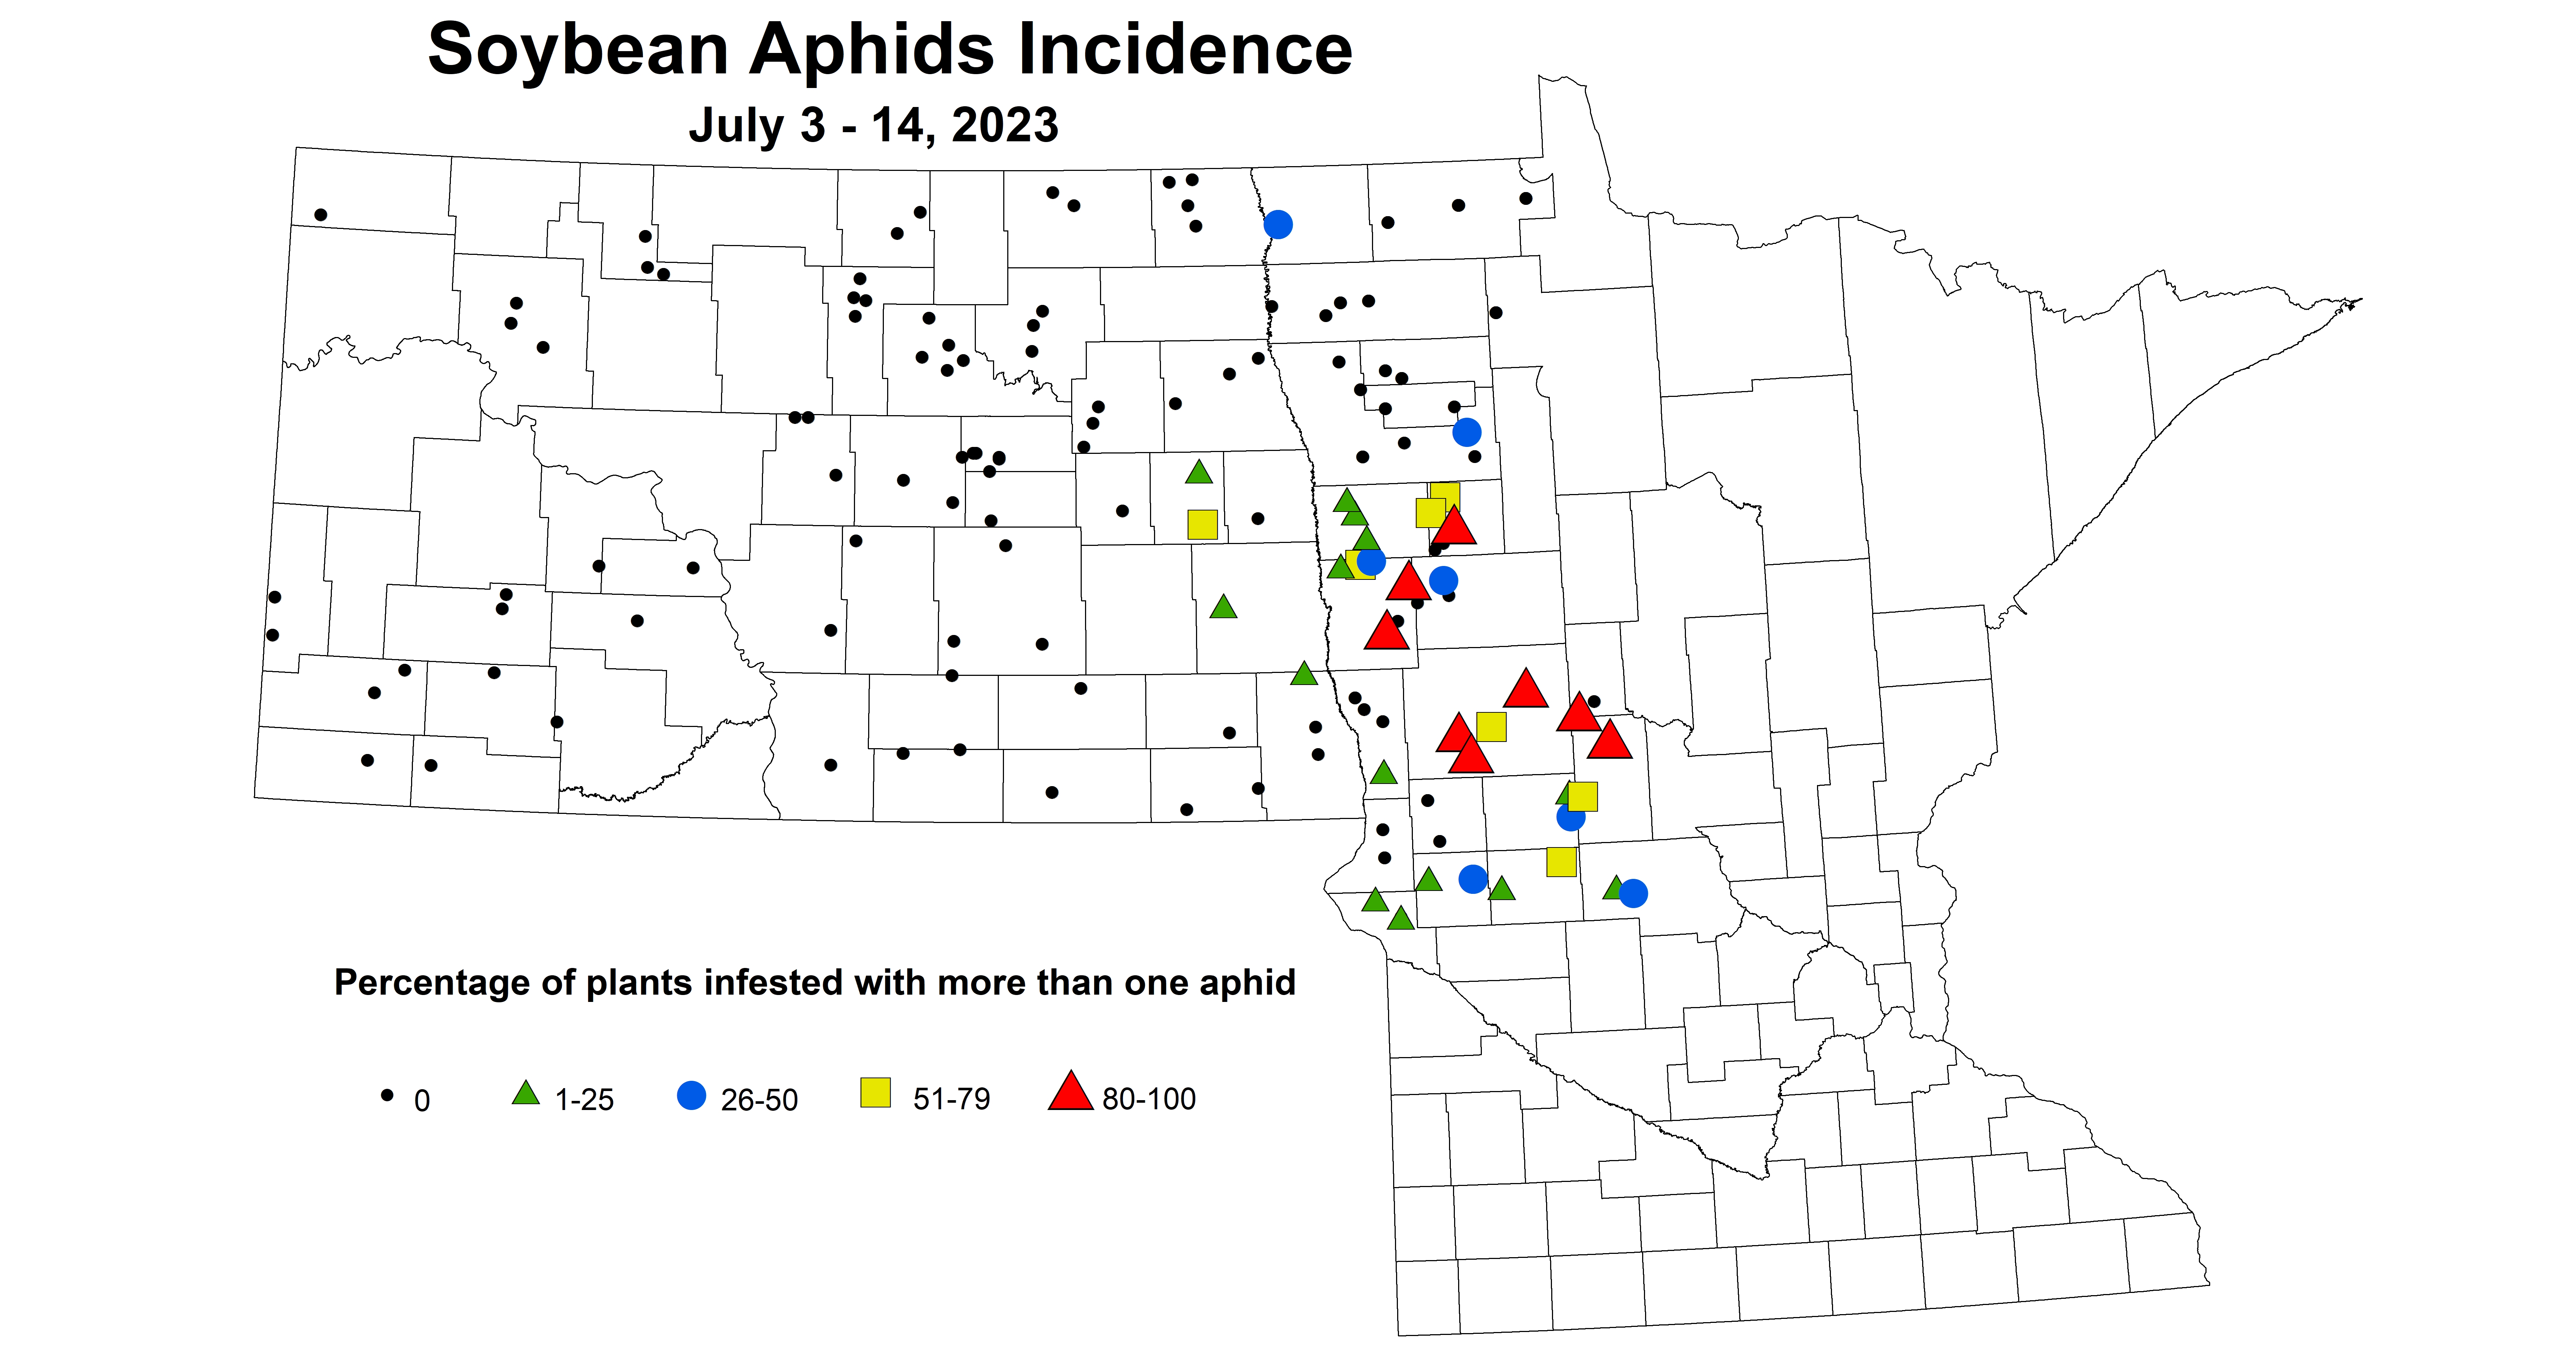 soybean aphid incidence July 3-14 2023